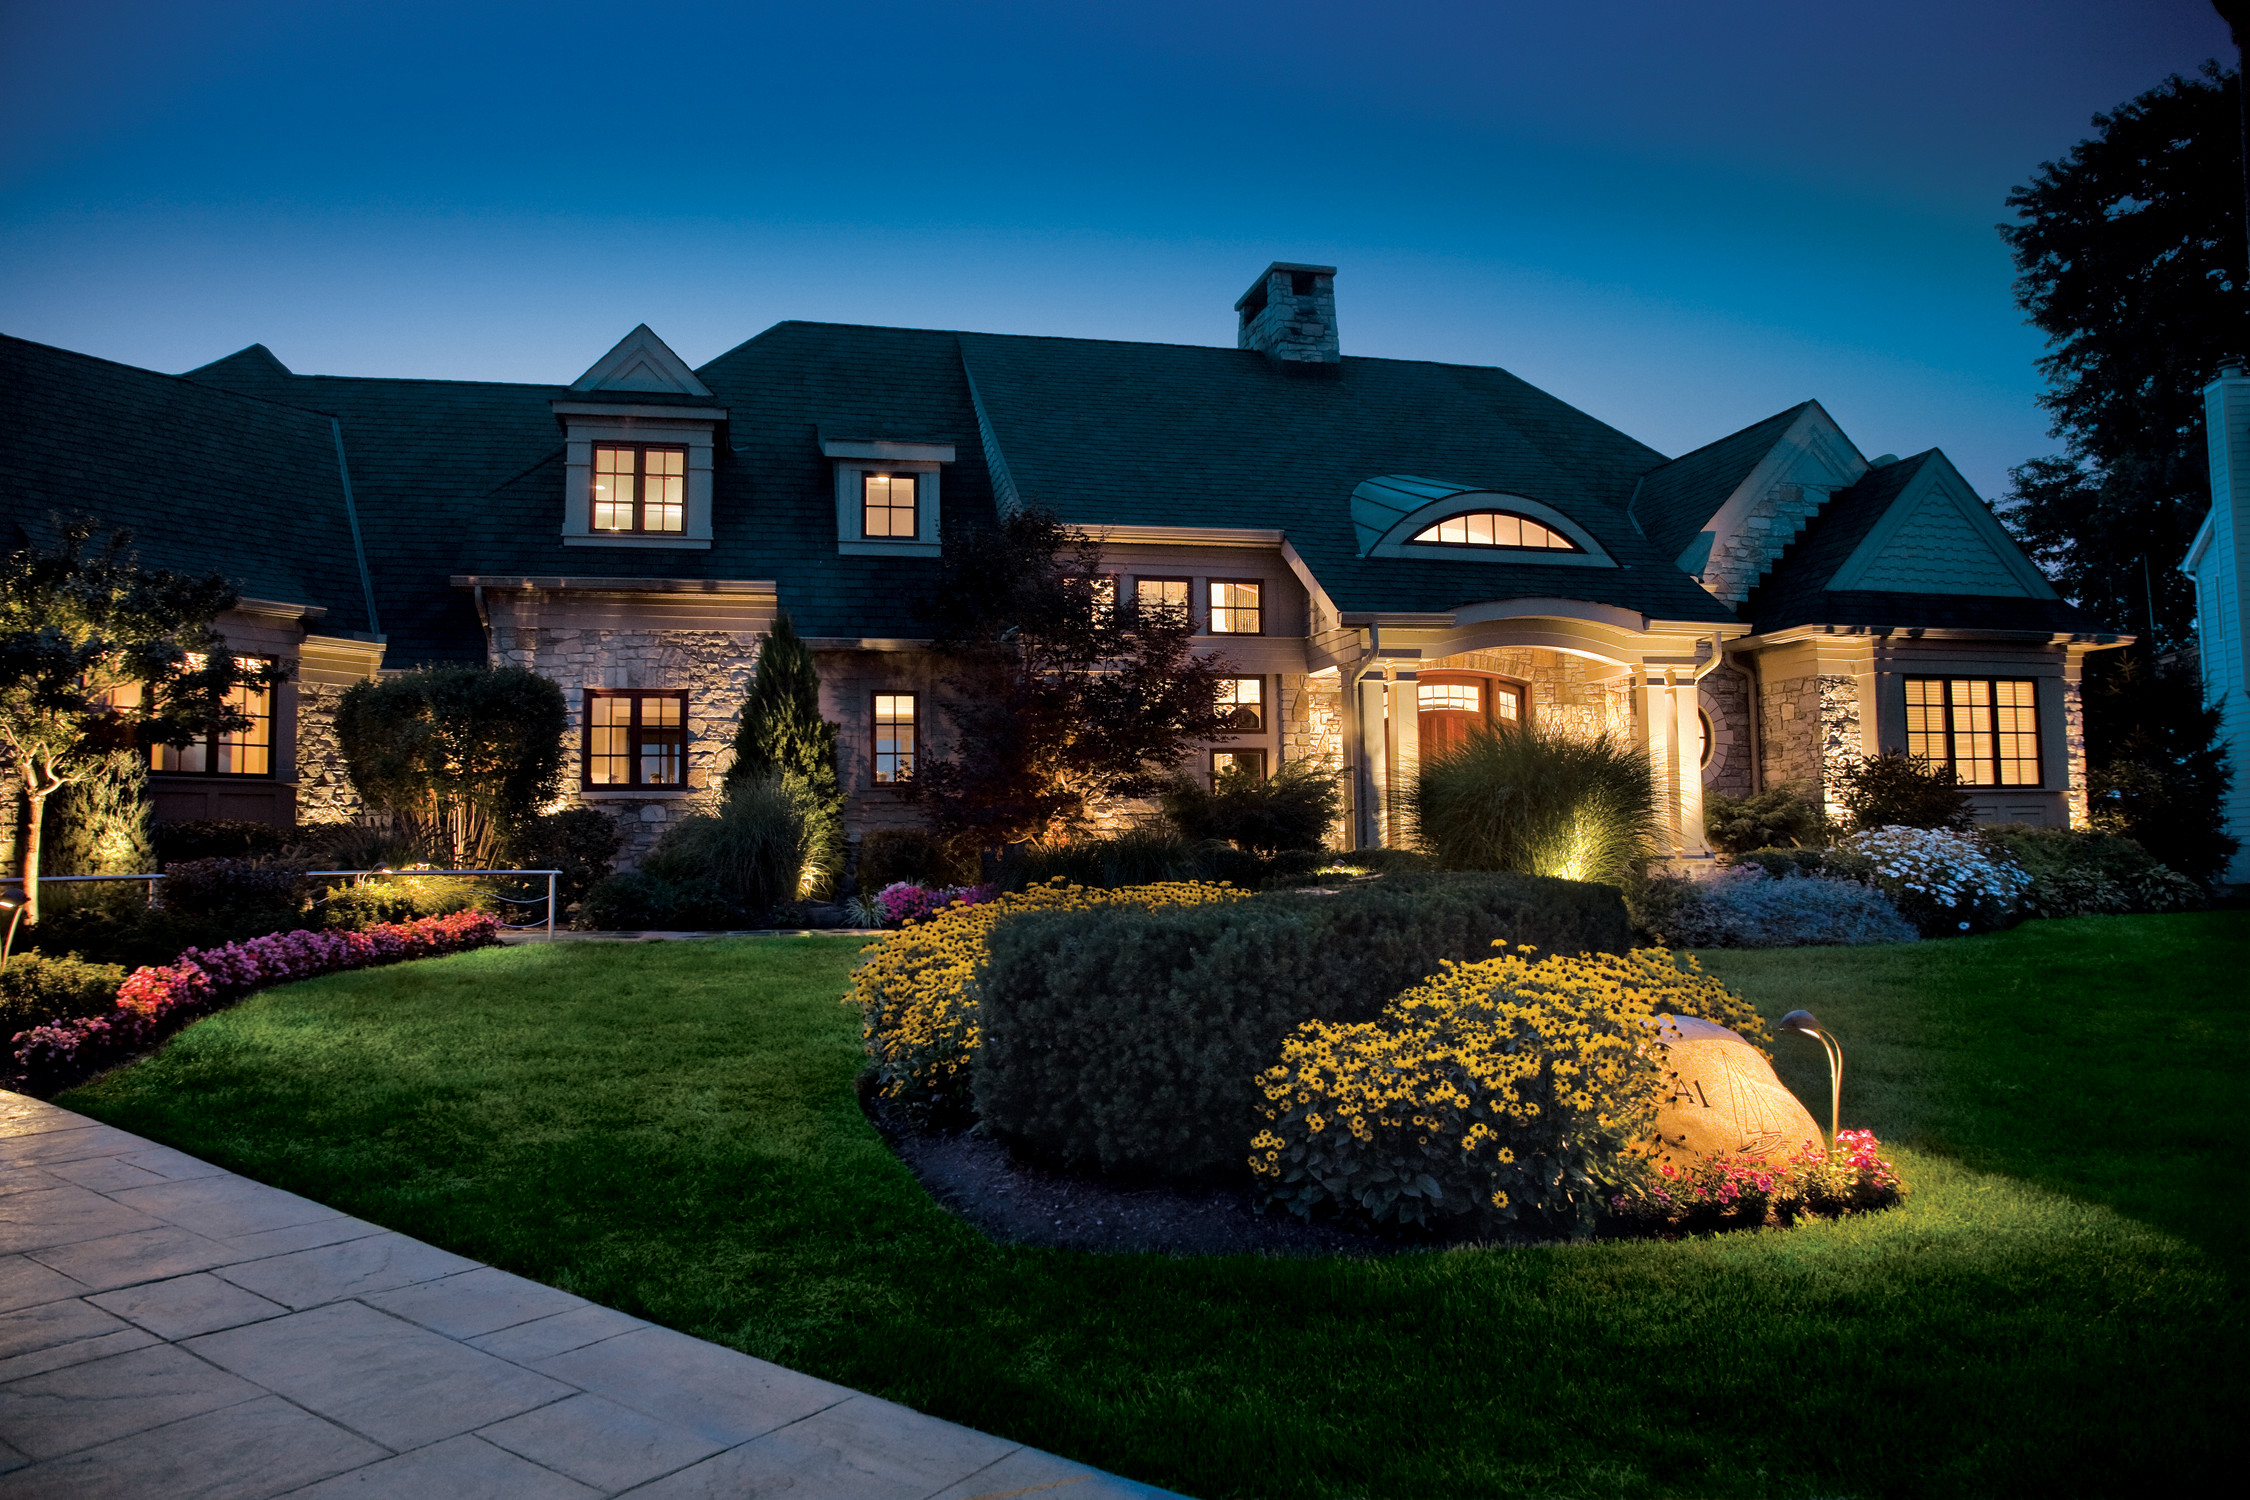 Landscape Lighting Ideas
 The Outdoor Lighting Ideas For Update Your House